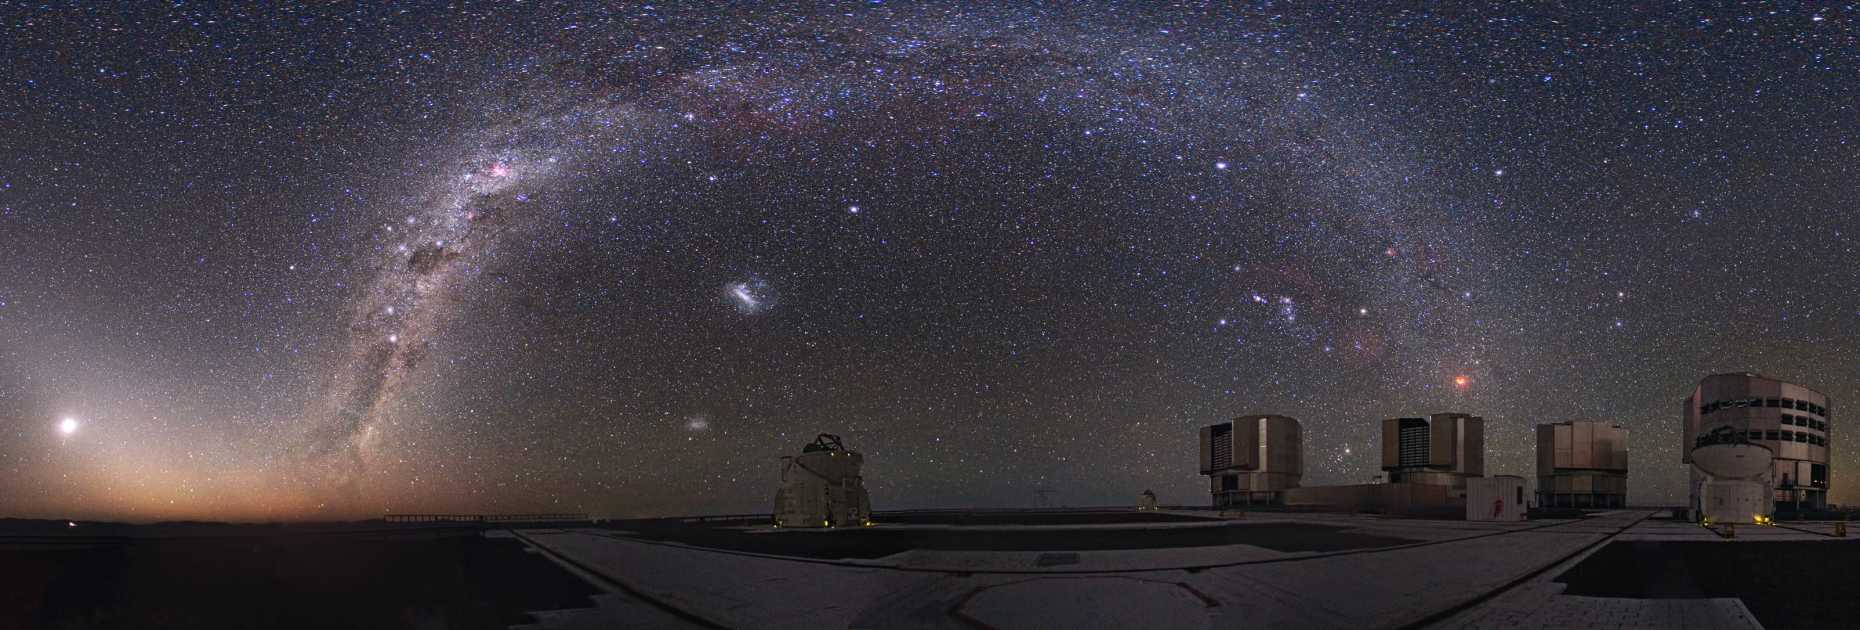 Enlarged view: The Very Large Telescope (VLT) complex 